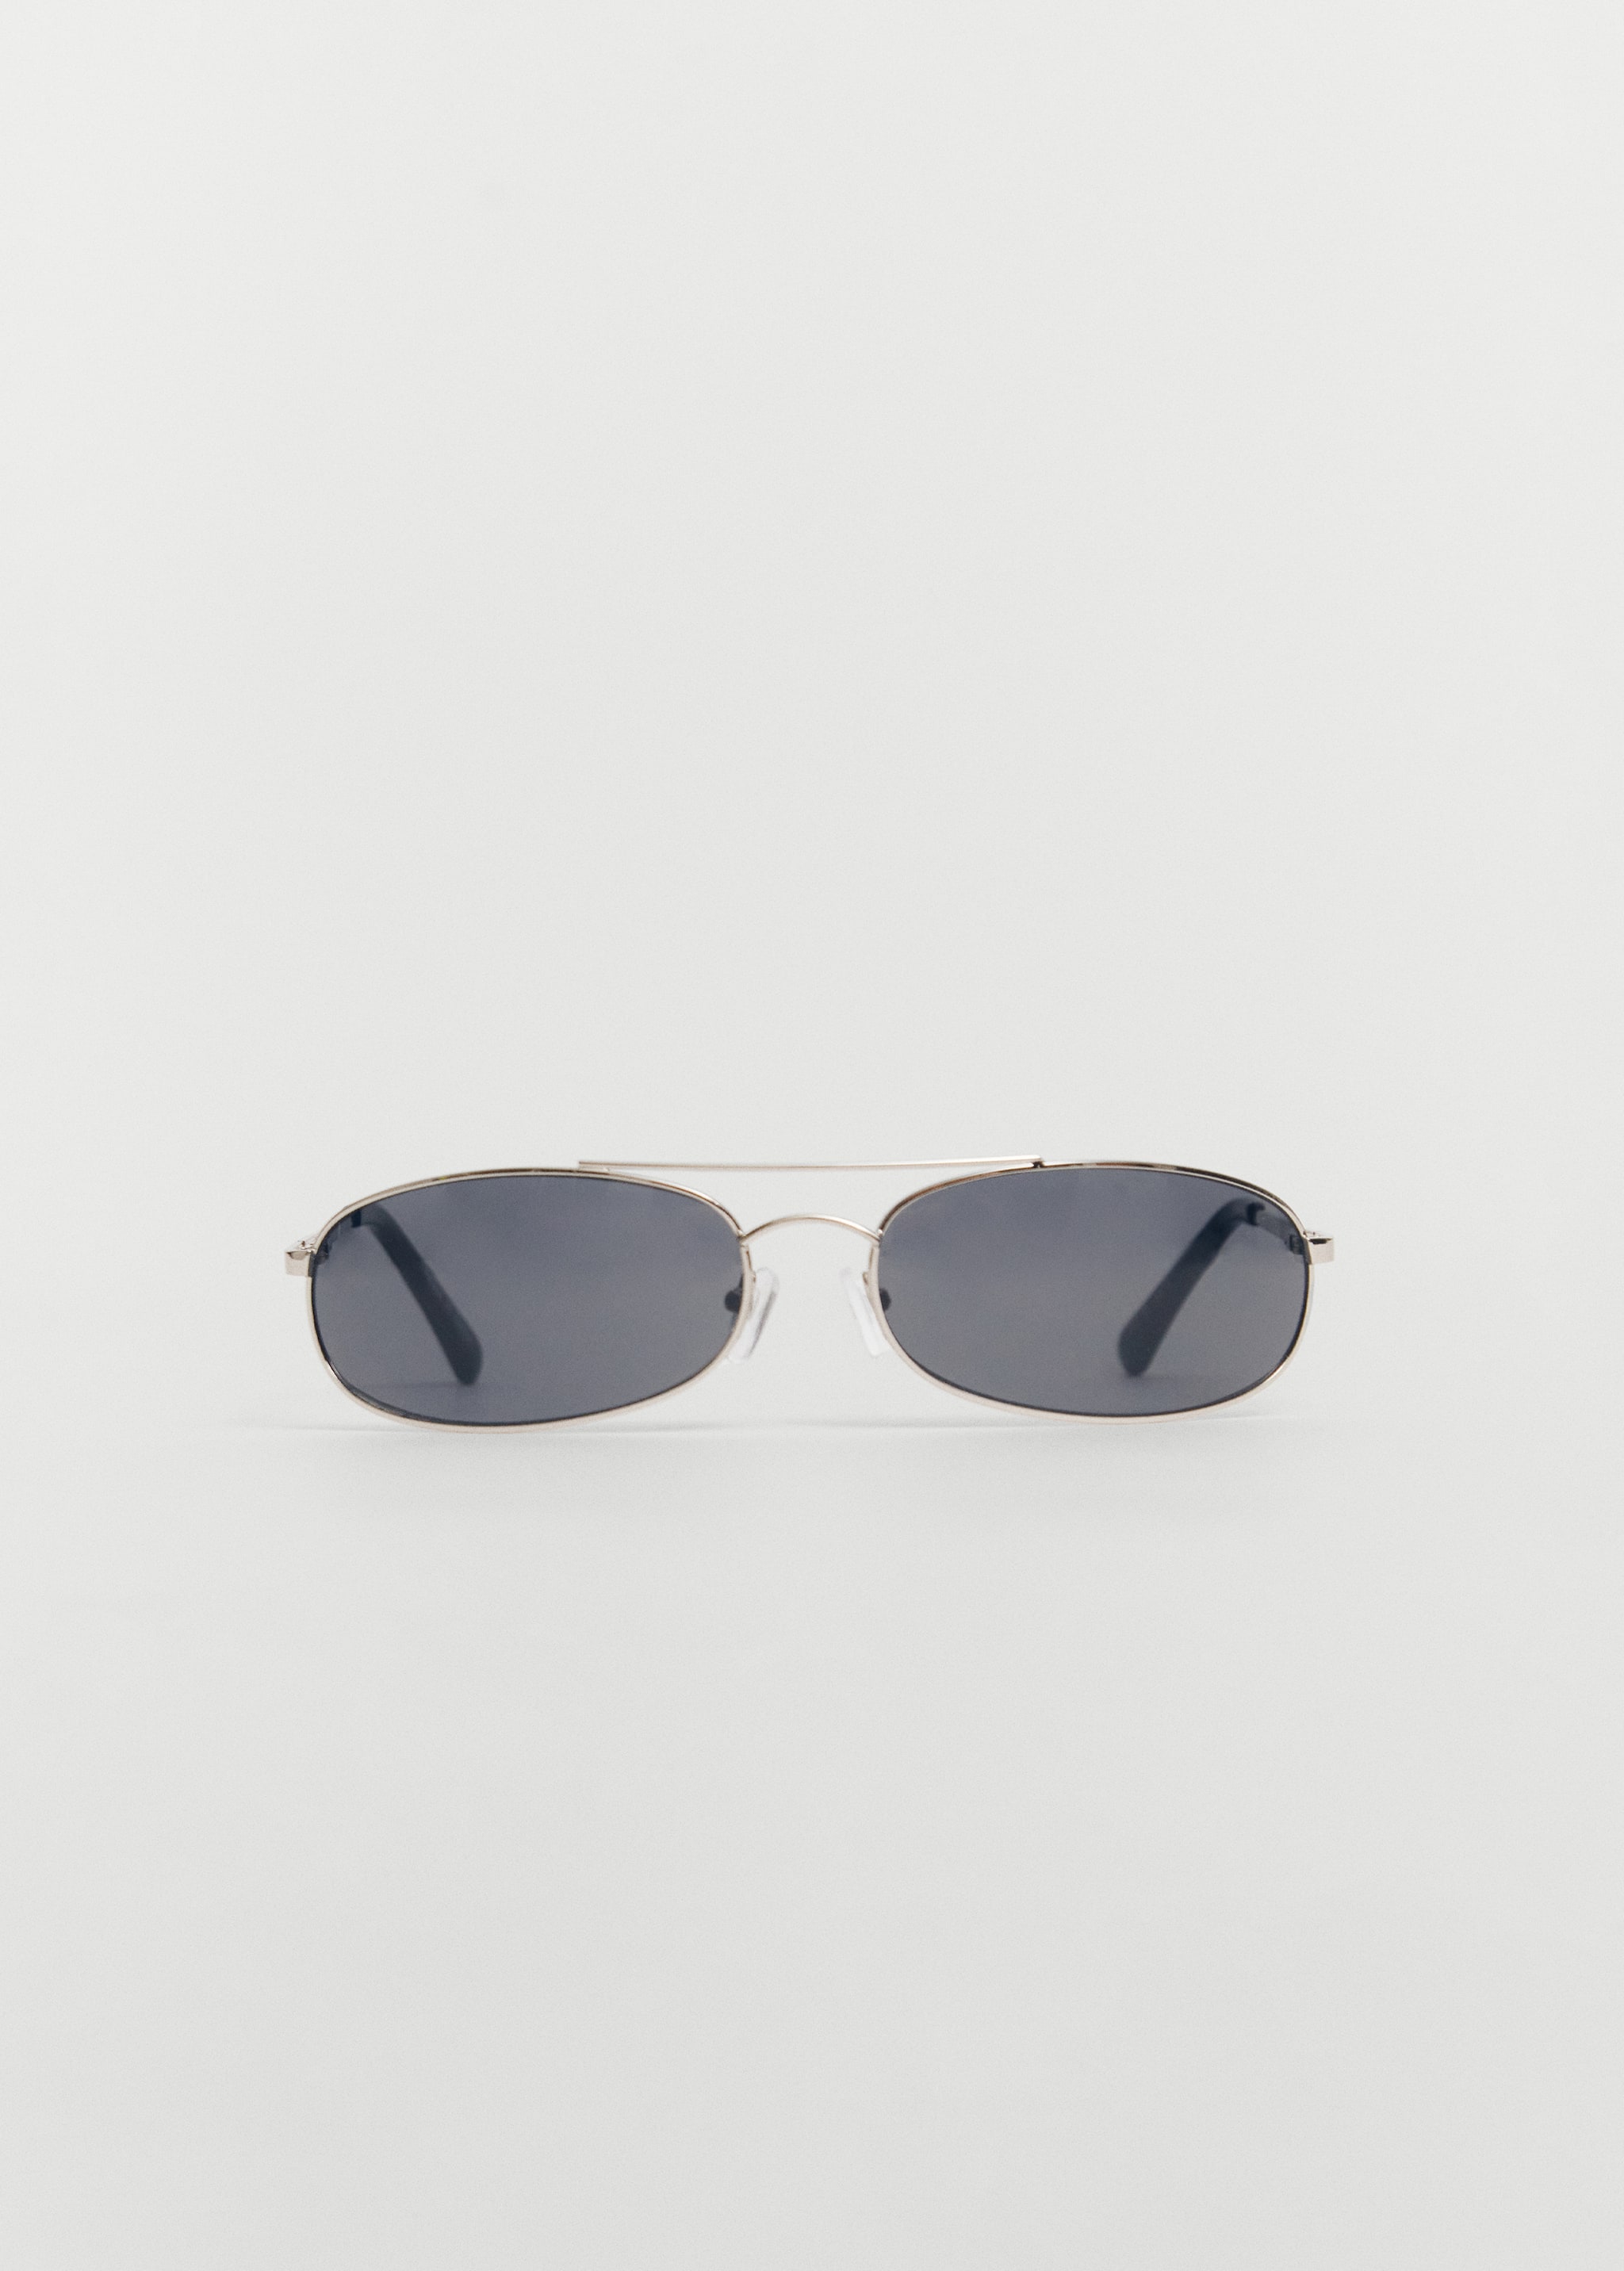 Metallic frame sunglasses - Article without model